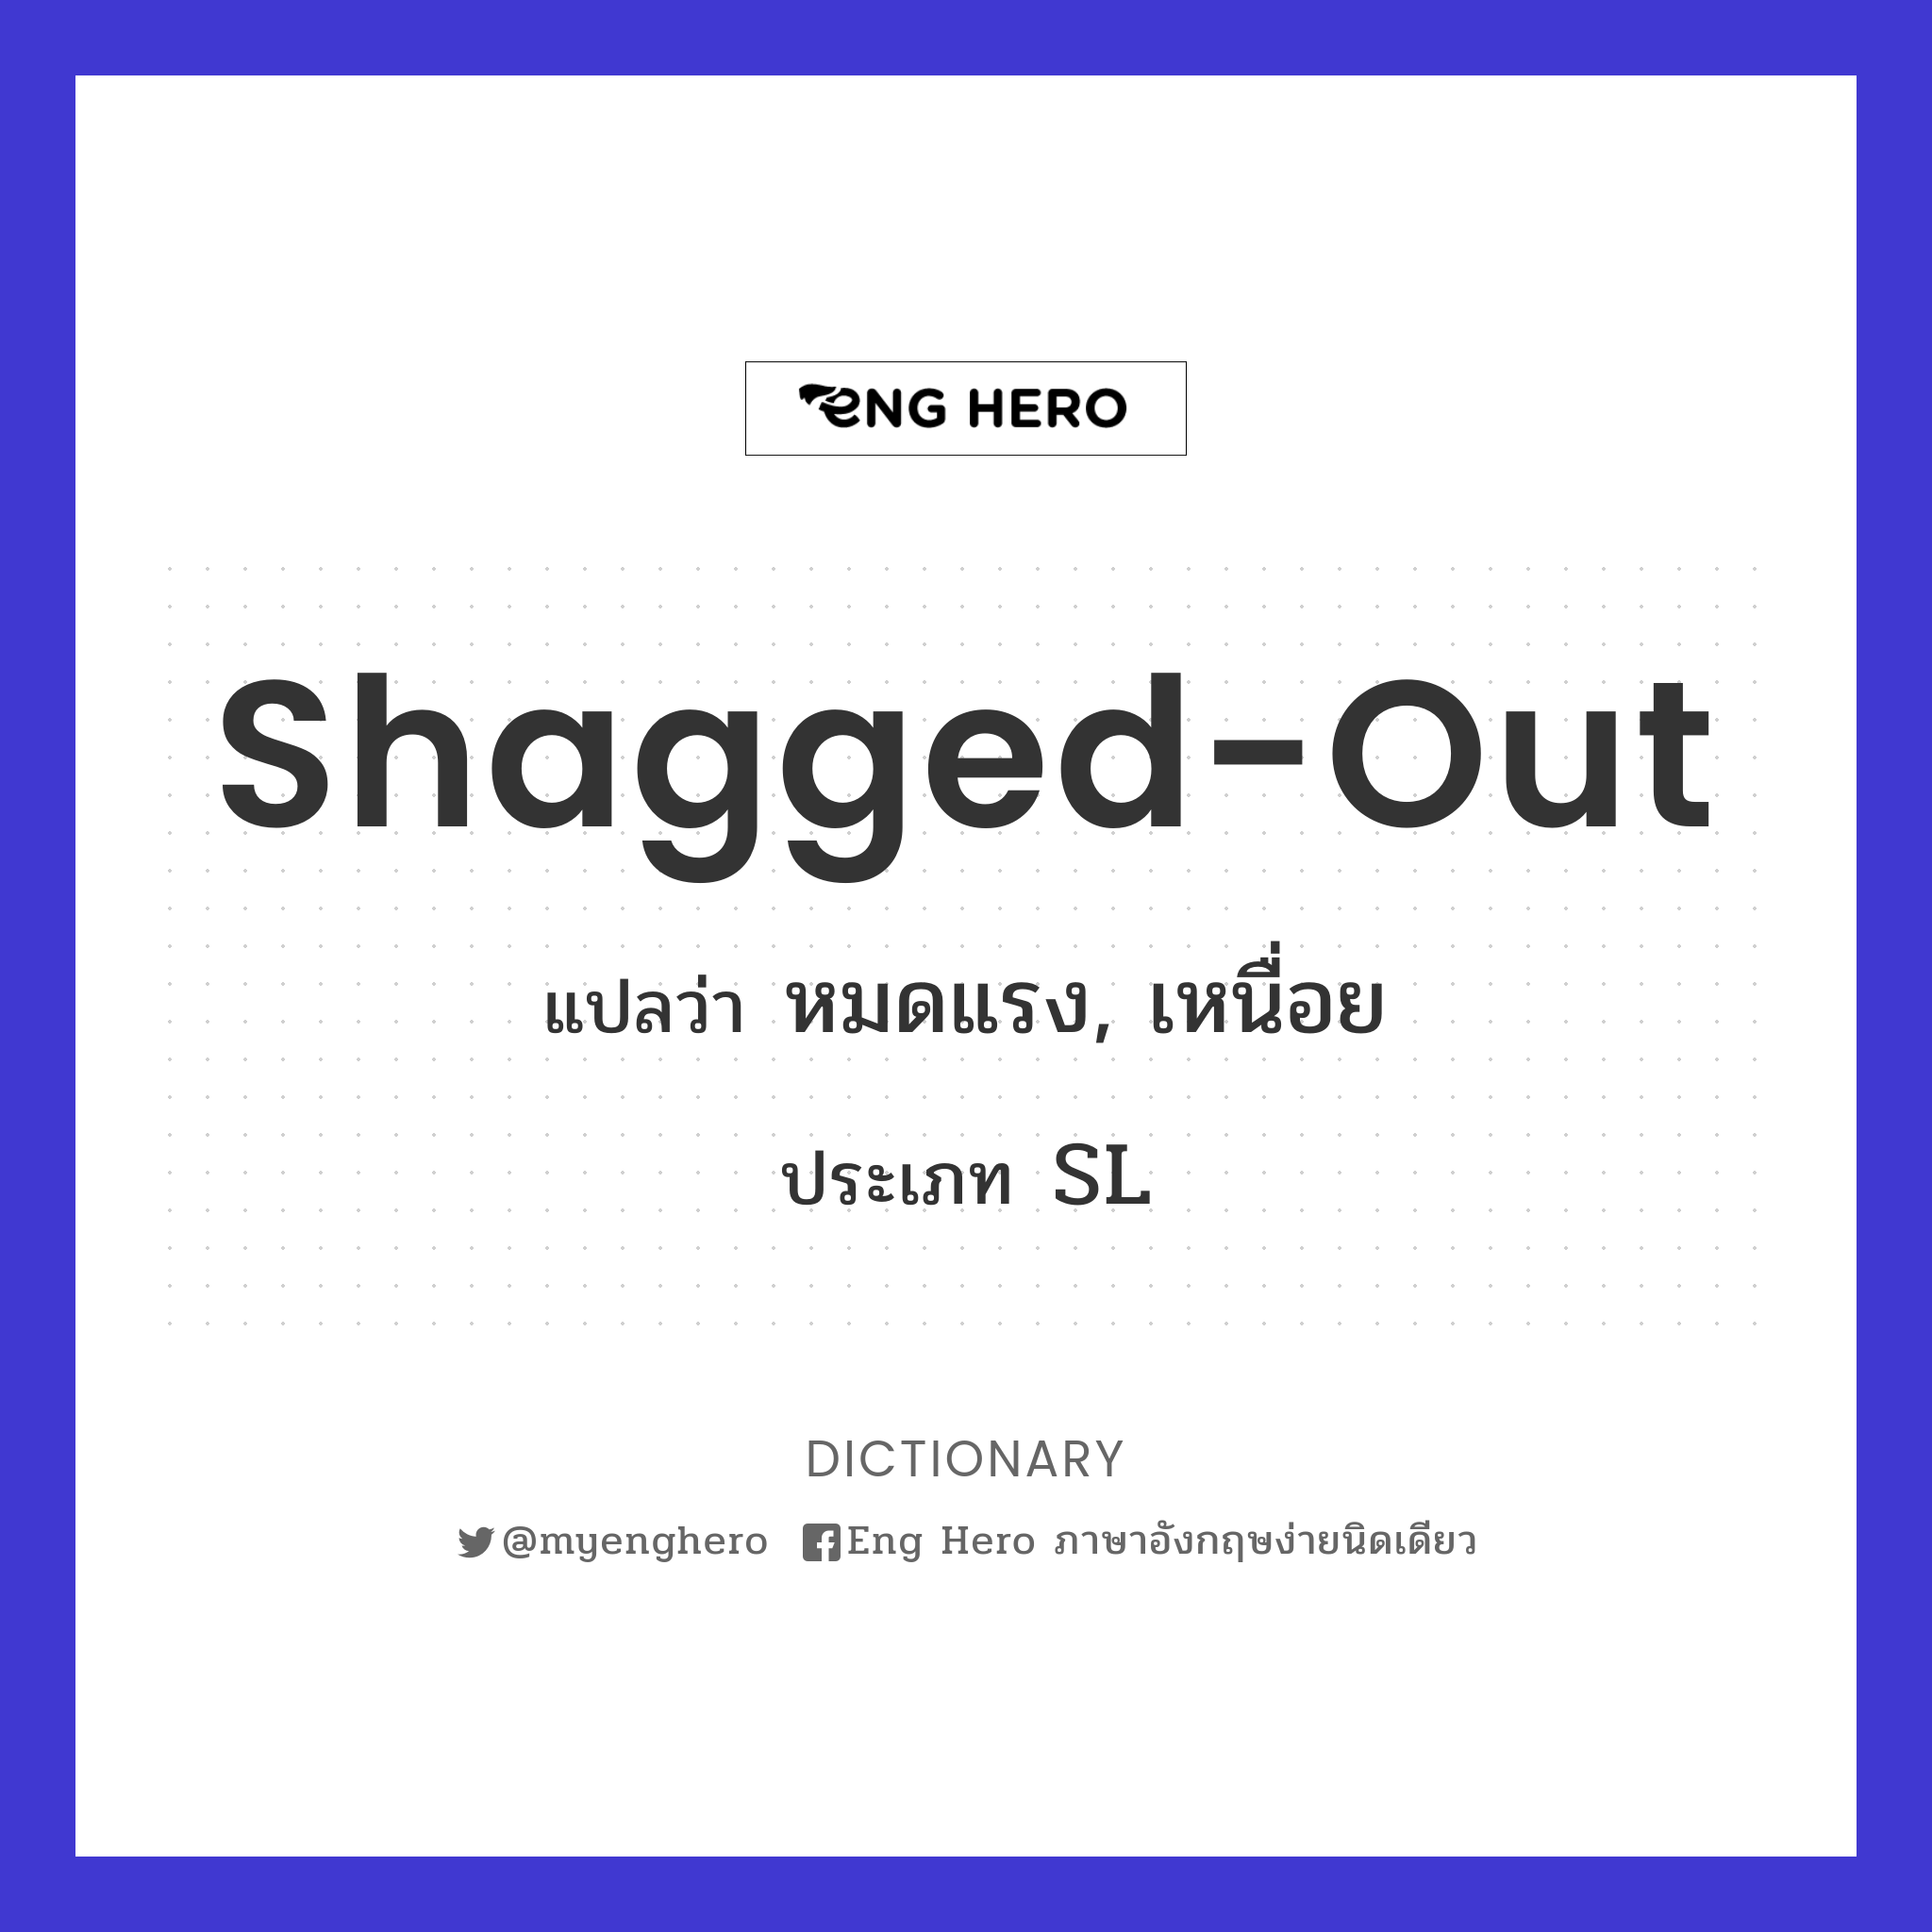 shagged-out